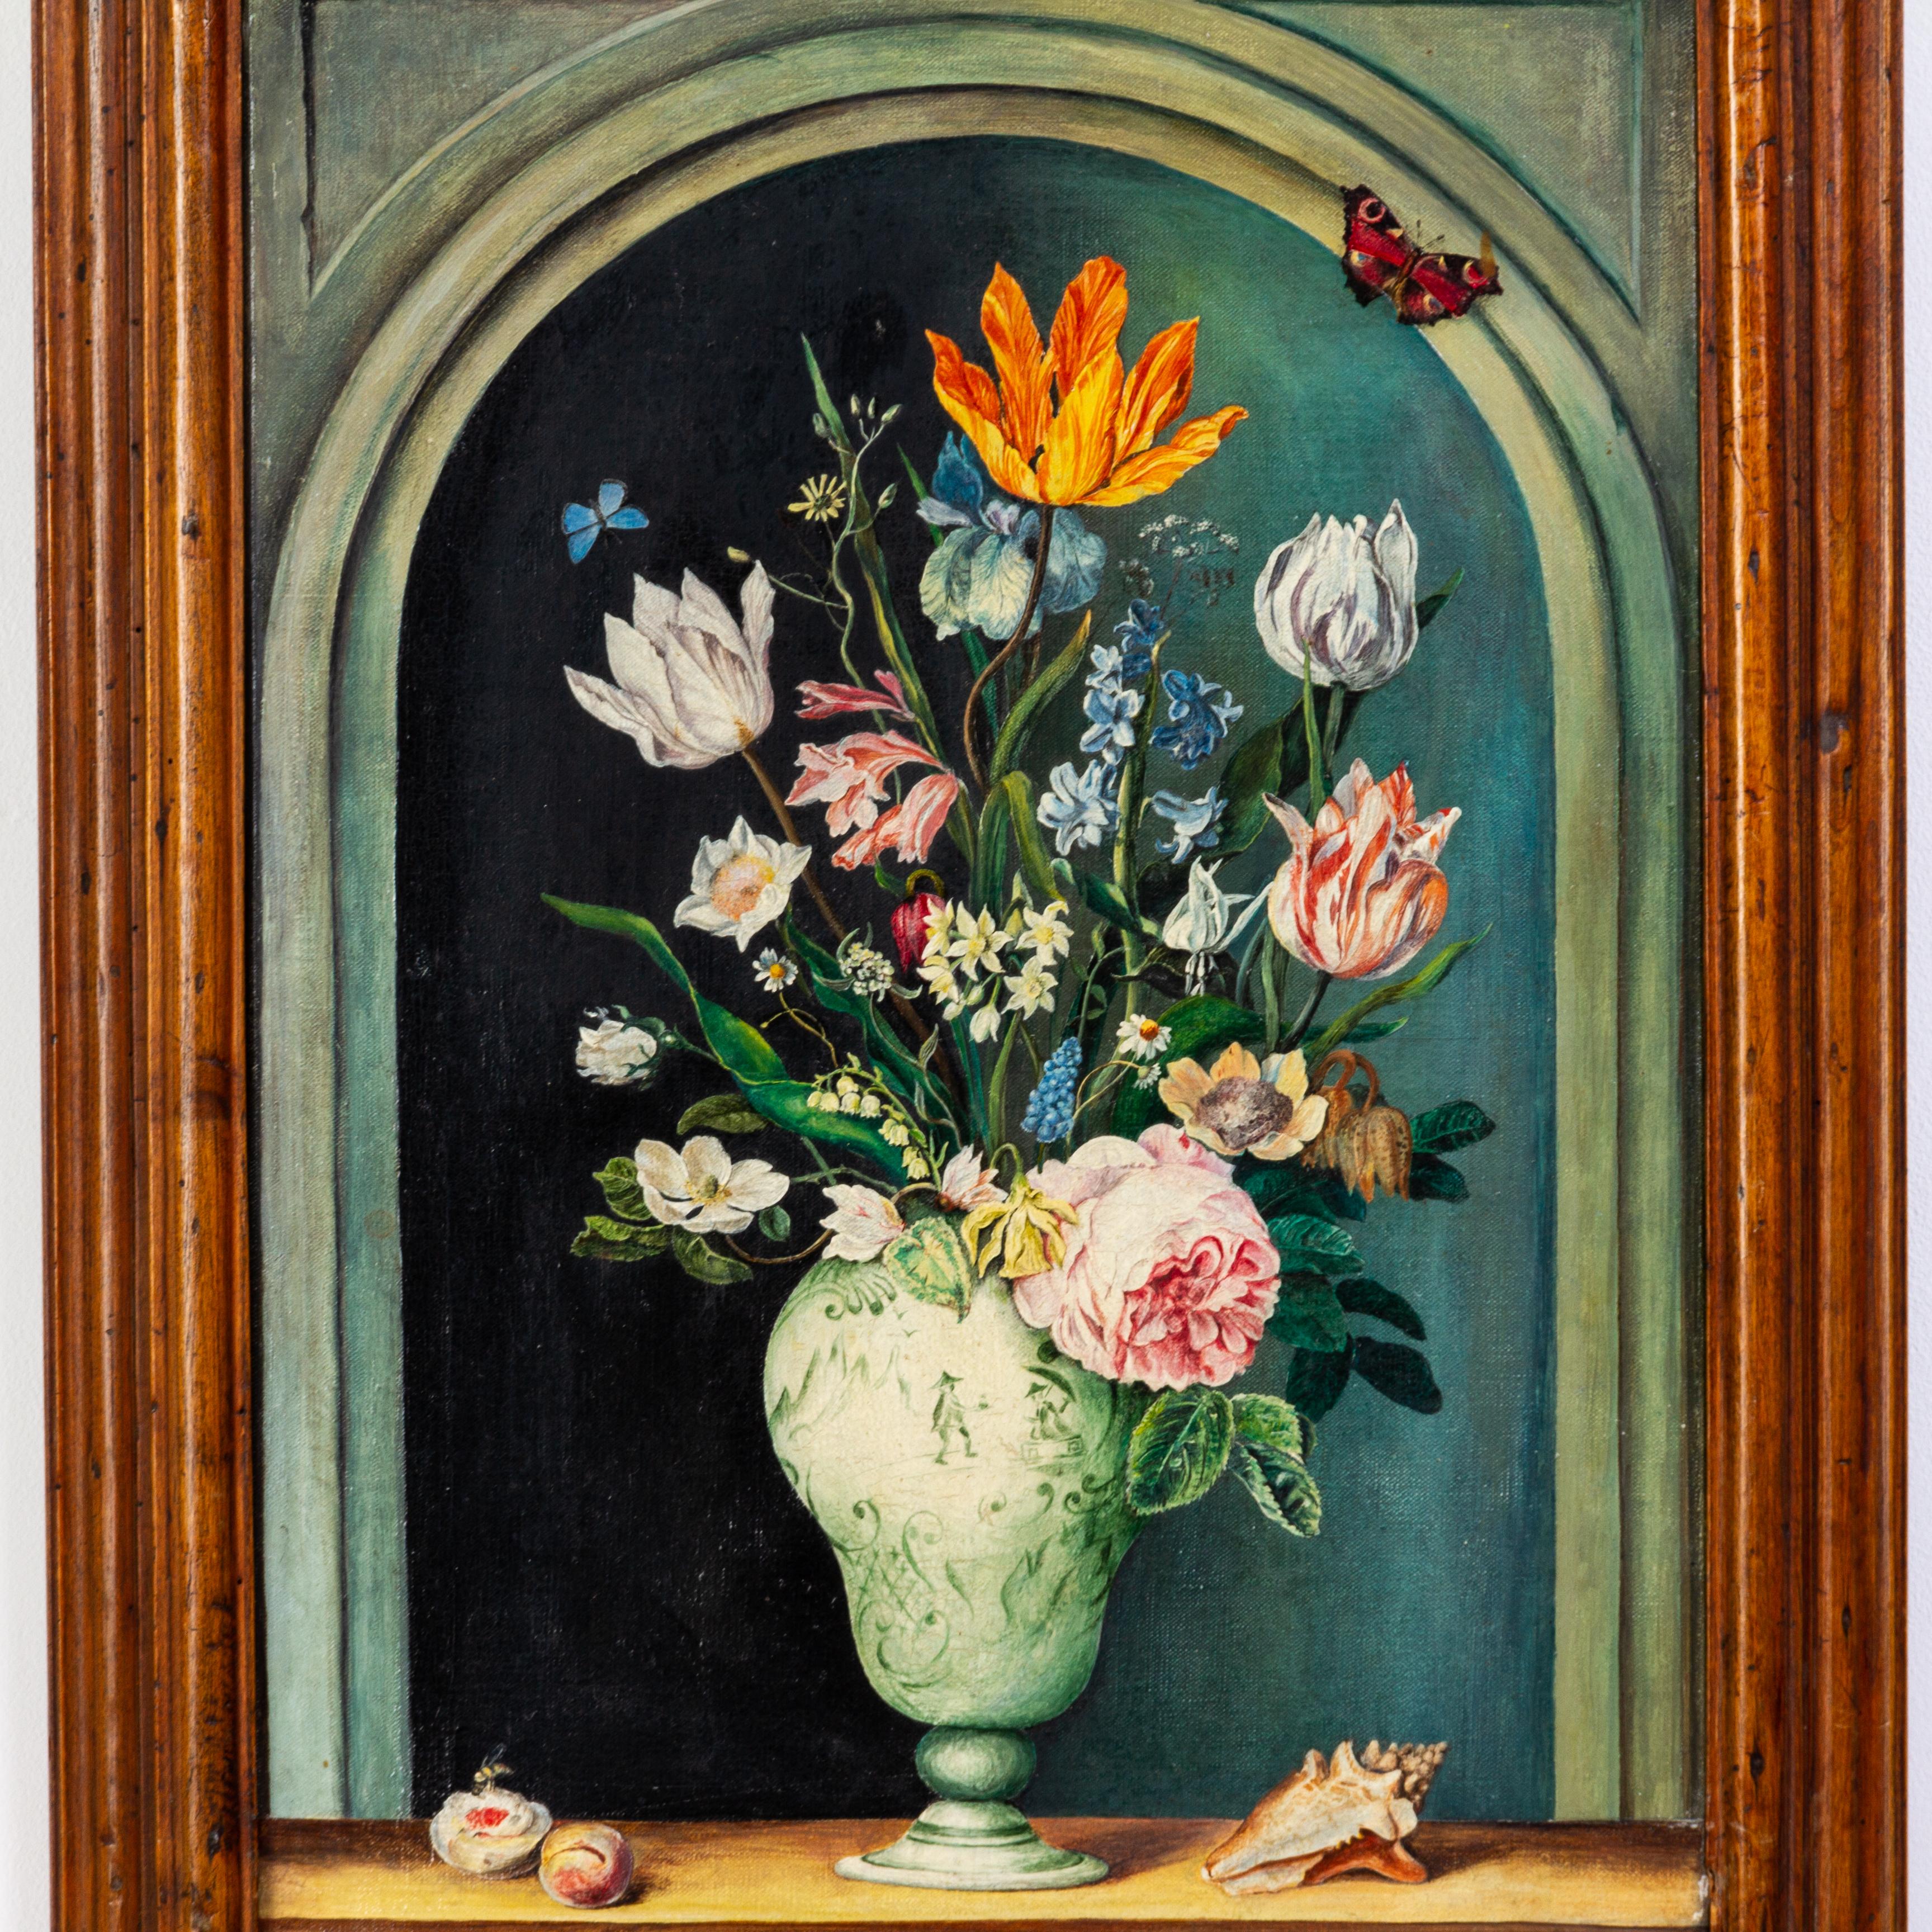 Victorian Still Life Flowers After the Old Masters Oleograph 19th Century
Dimensions: 39 x 54cm, framed.
Good condition 
From a private collection.
Free international shipping.